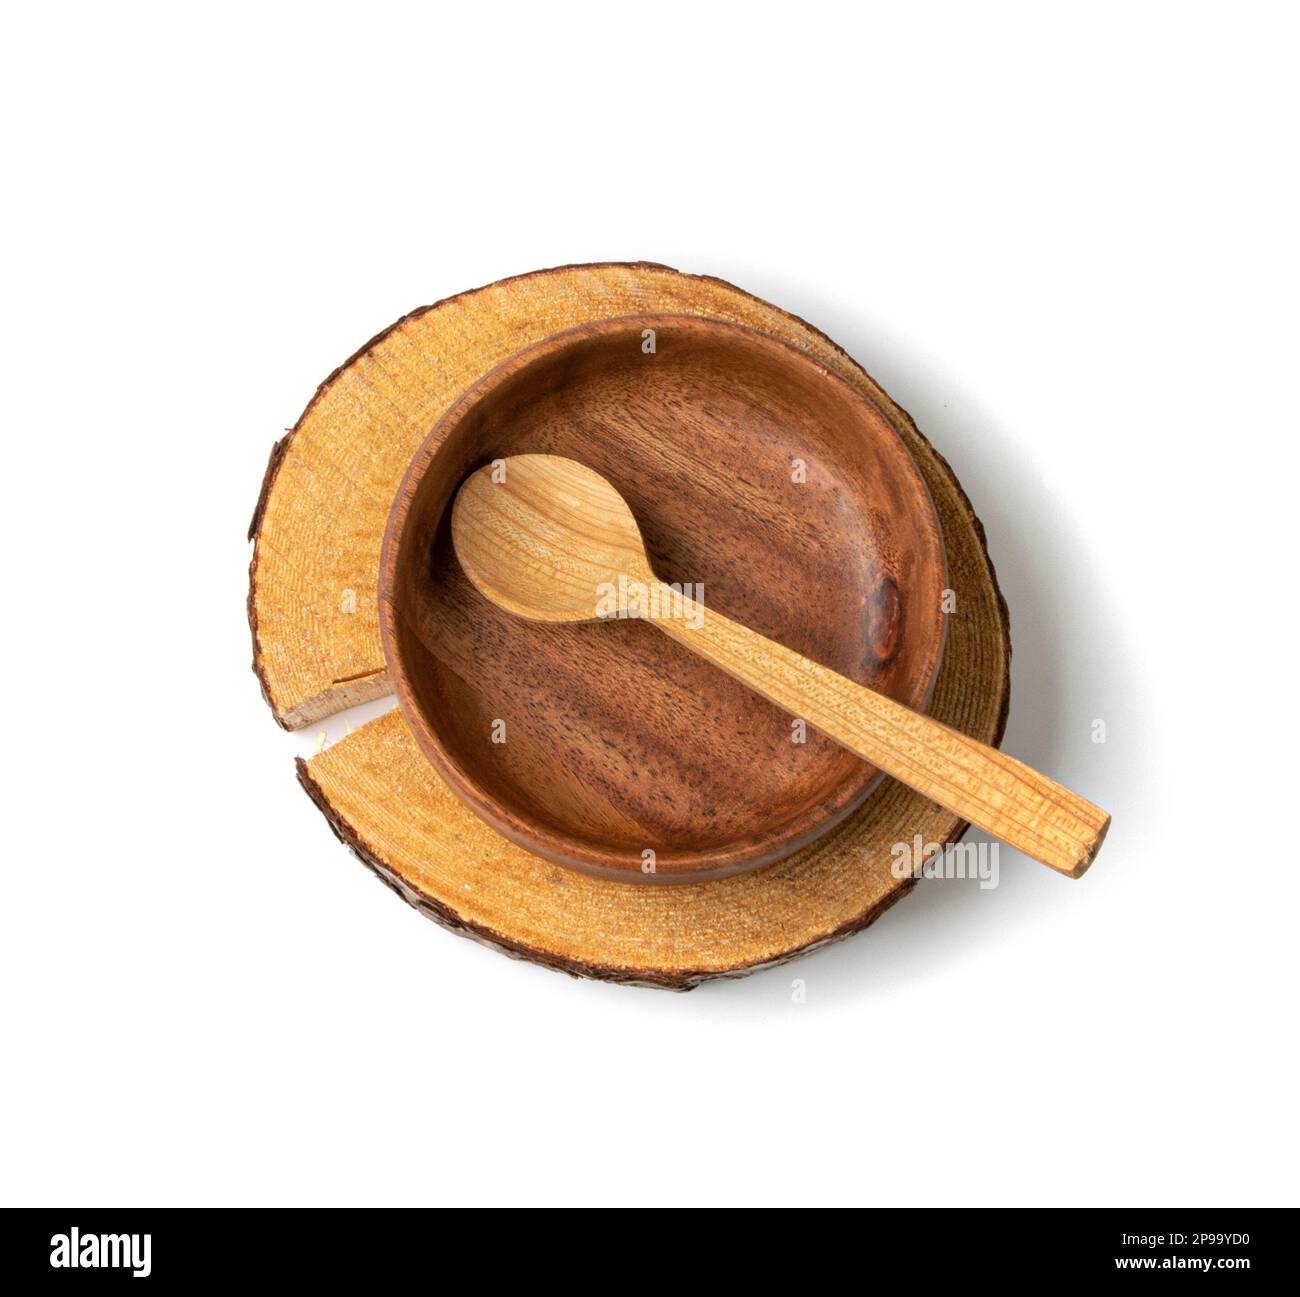 Empty Wood Bowls Isolated, Round Wooden Bowl on White Background Top View, Rustic Kitchen Mockup with Copy Space Stock Photo